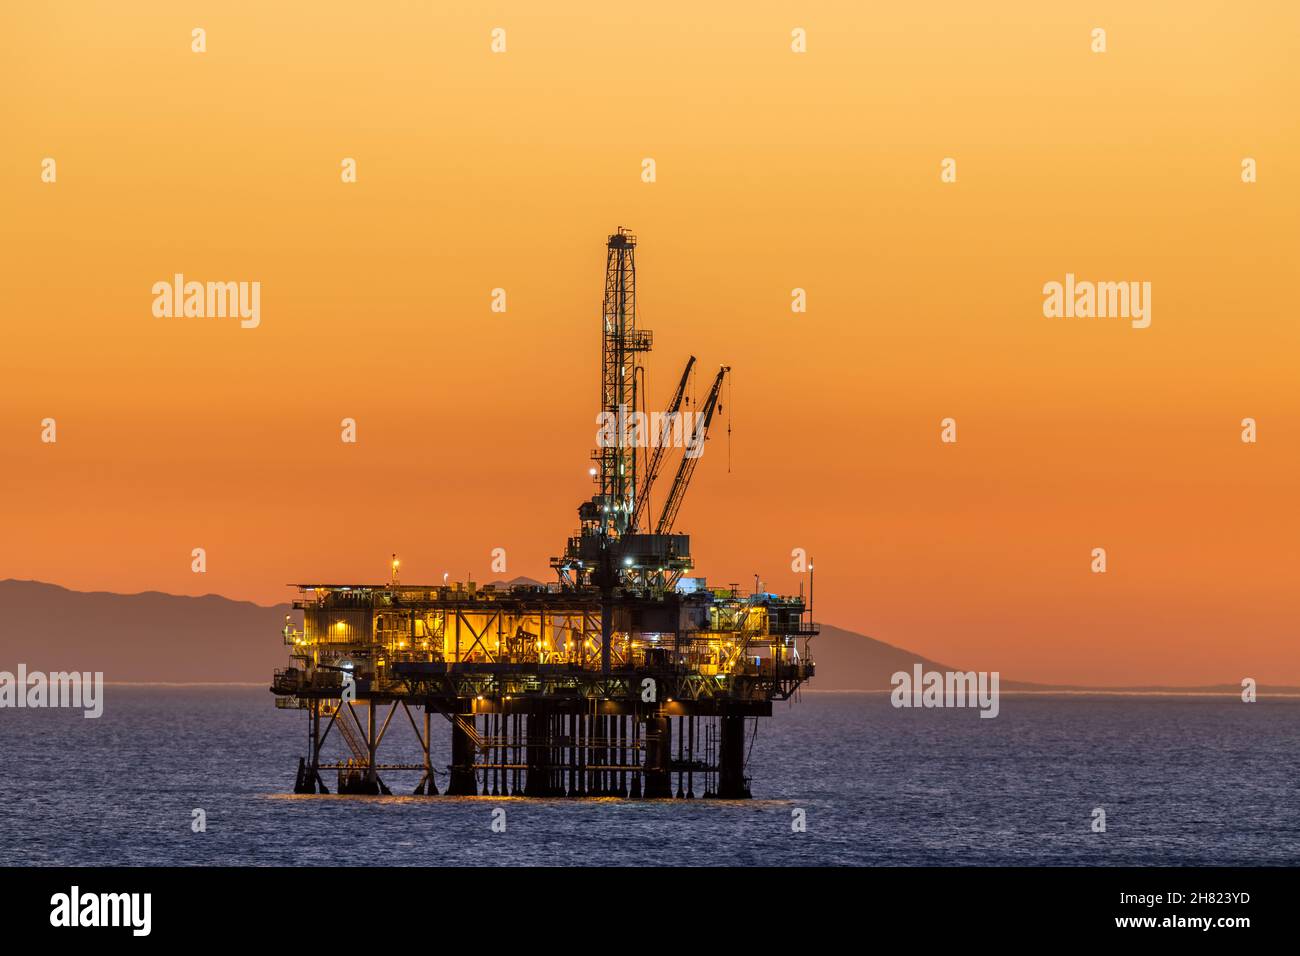 Offshore oil platform off the coast of California frames against an orange sky full of smoke from a nearby fire as the sun sets behind the rig. Stock Photo